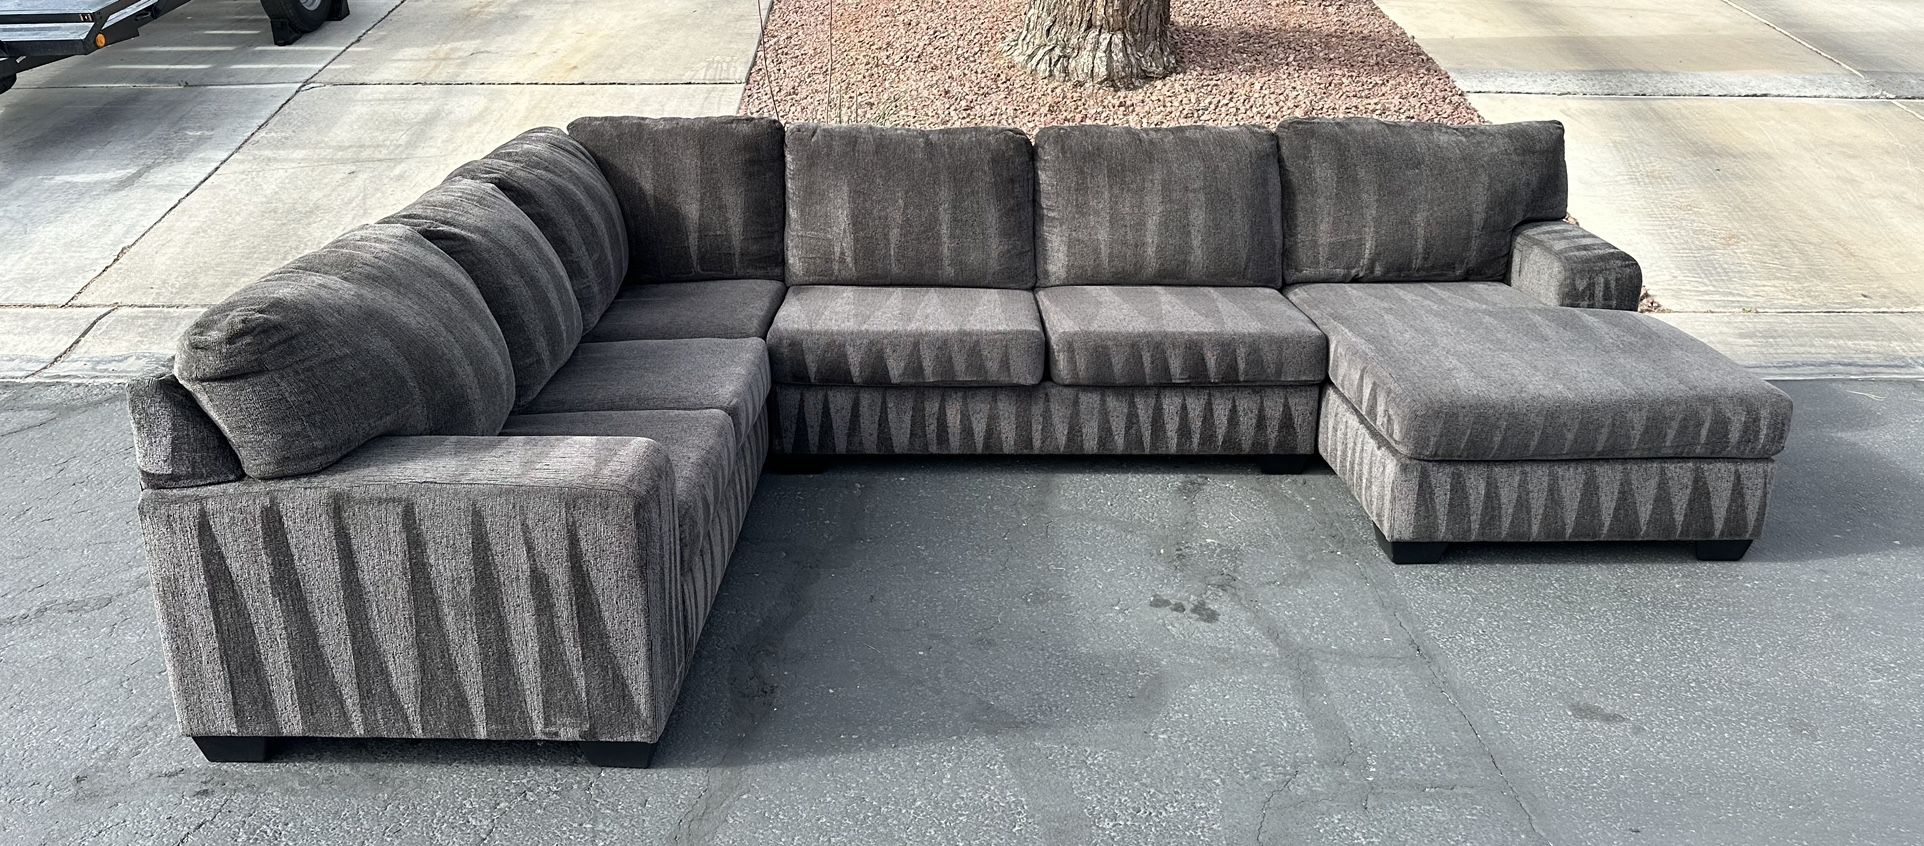 Beautiful Ashley’s Furniture Design Charcoal Gray Ash Sectional Sofa Couch U Shape With Chaise Lounger